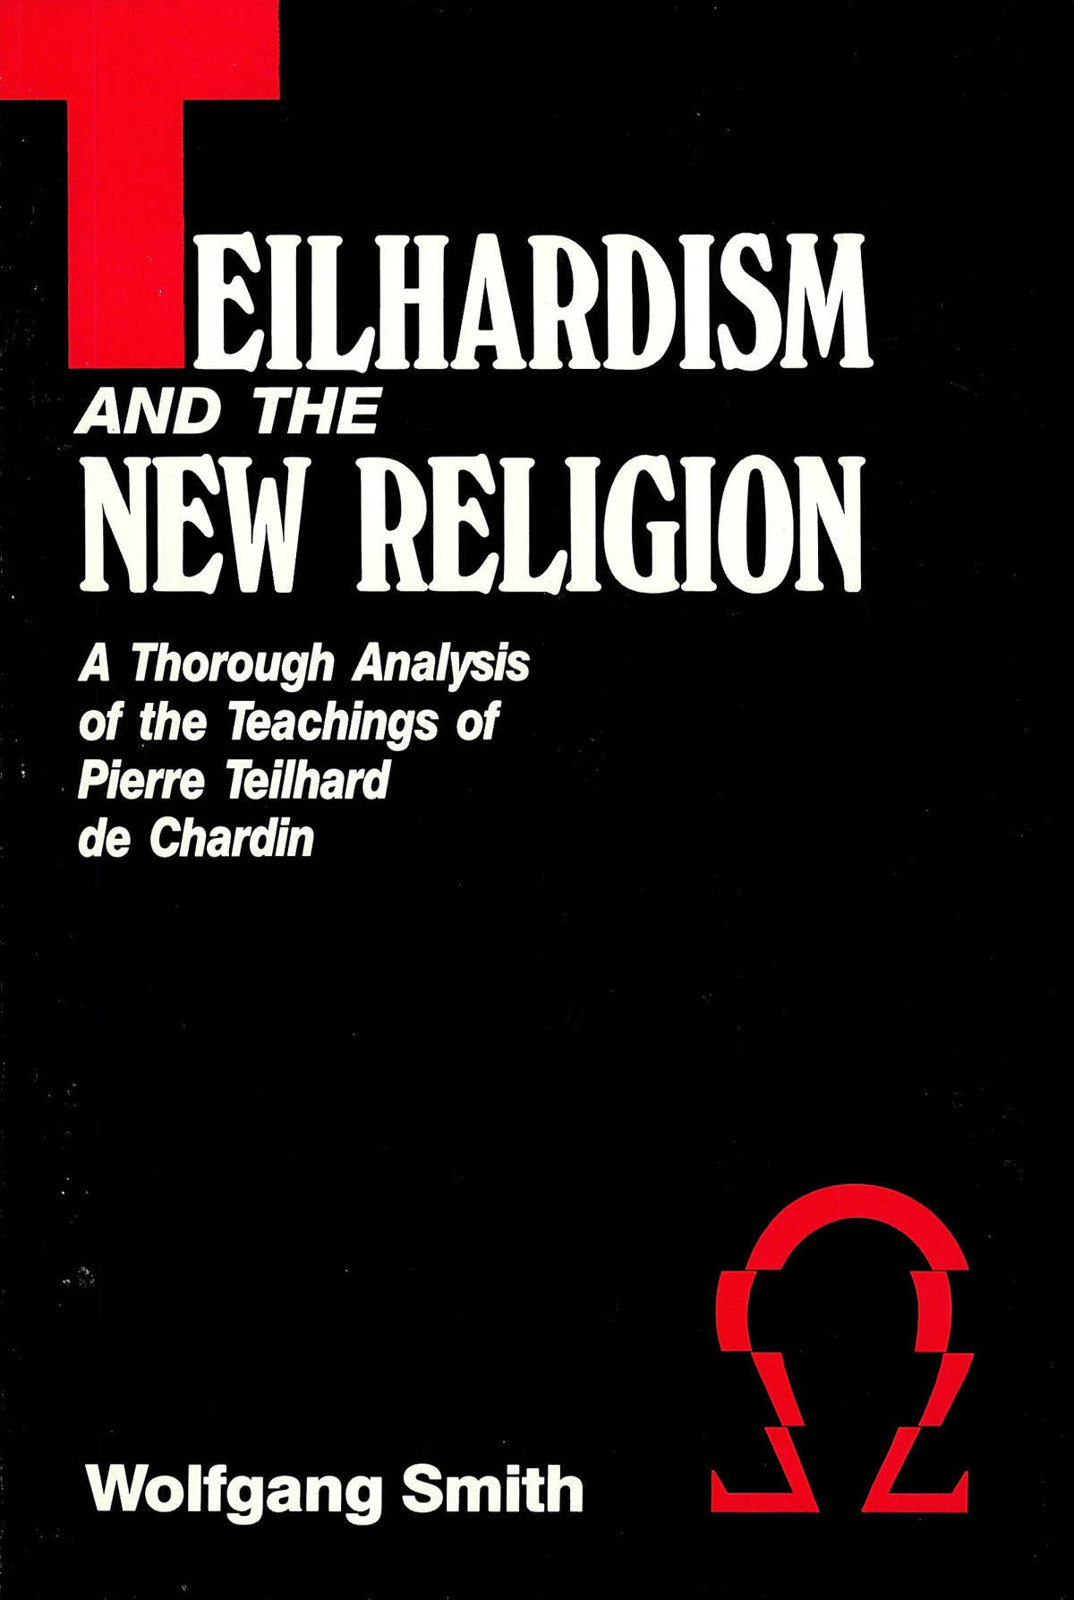 Teilhardism and the New Religion: A Thorough Analysis of the Teachings of Pierre Teilhard De Chardin